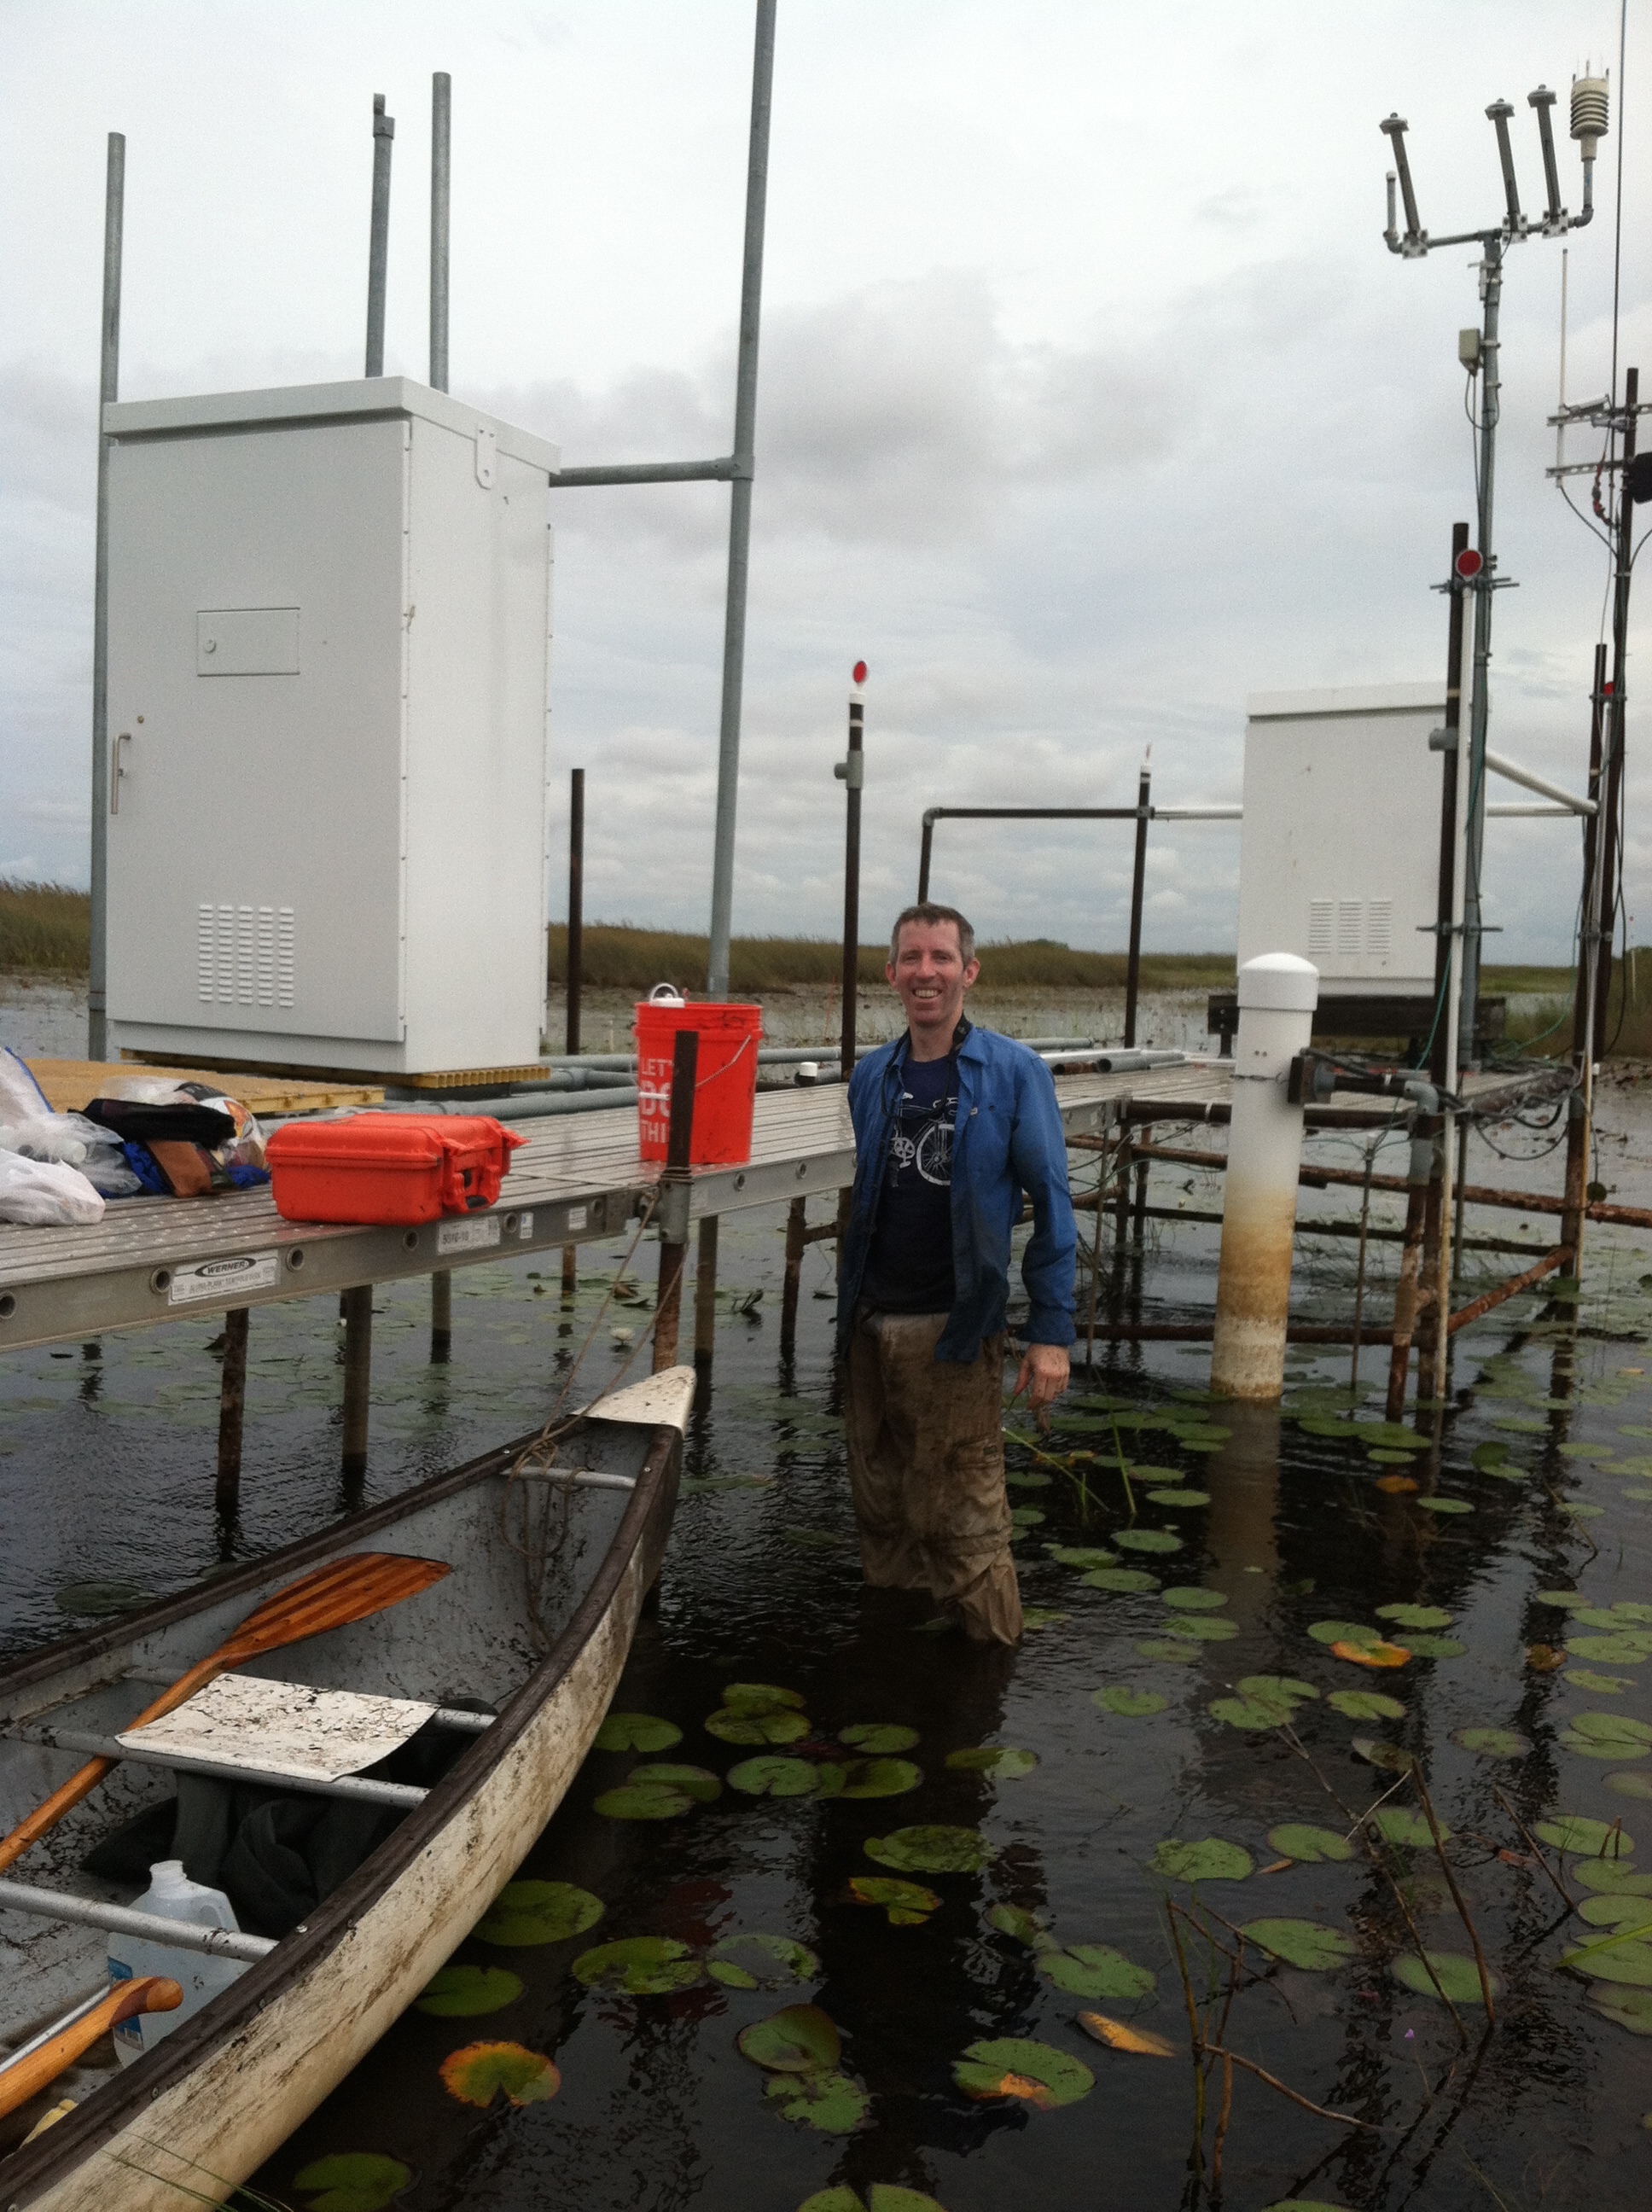 Assistant Professor and FCE Co-PI, John Kominoski and collaborators, Chris McVoy and Jim Brock, are investigating the foundational role of floc in the structural and functional attributes of the ridge and slough ecosystems of the Central Everglades